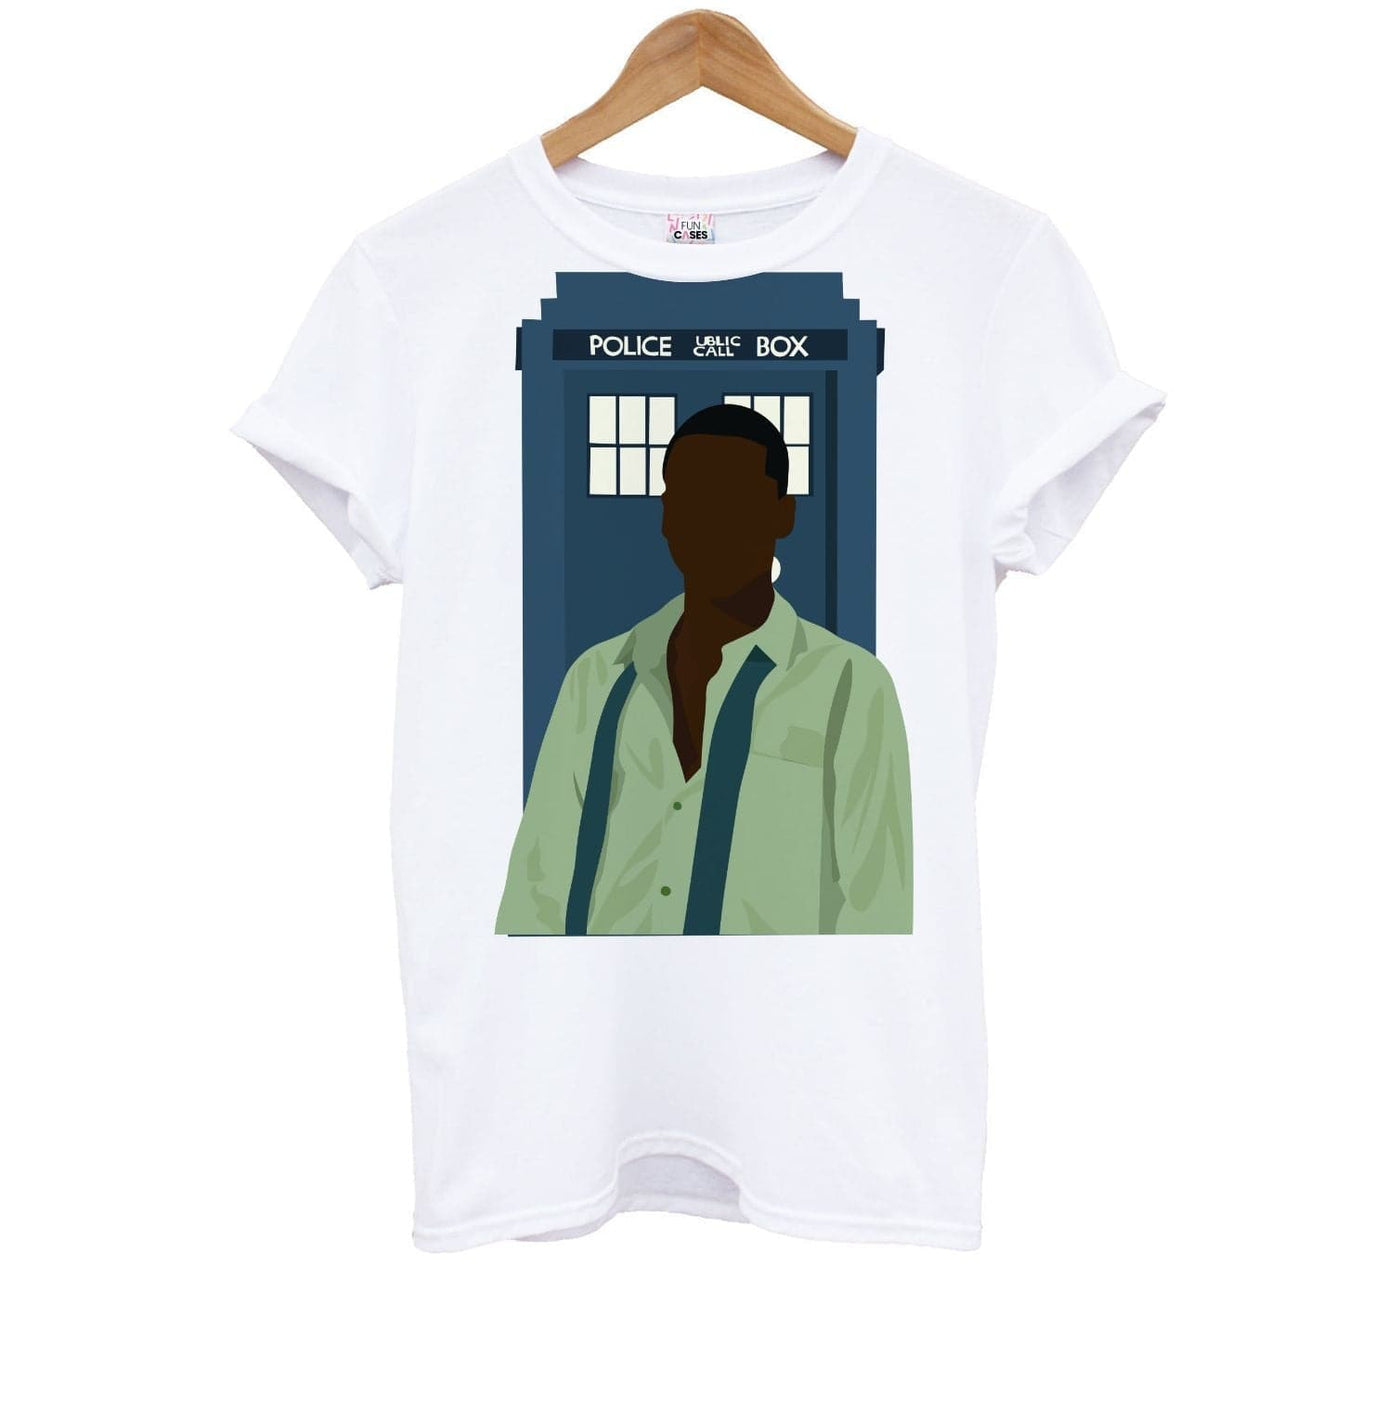 The Doctor - Doctor Who Kids T-Shirt